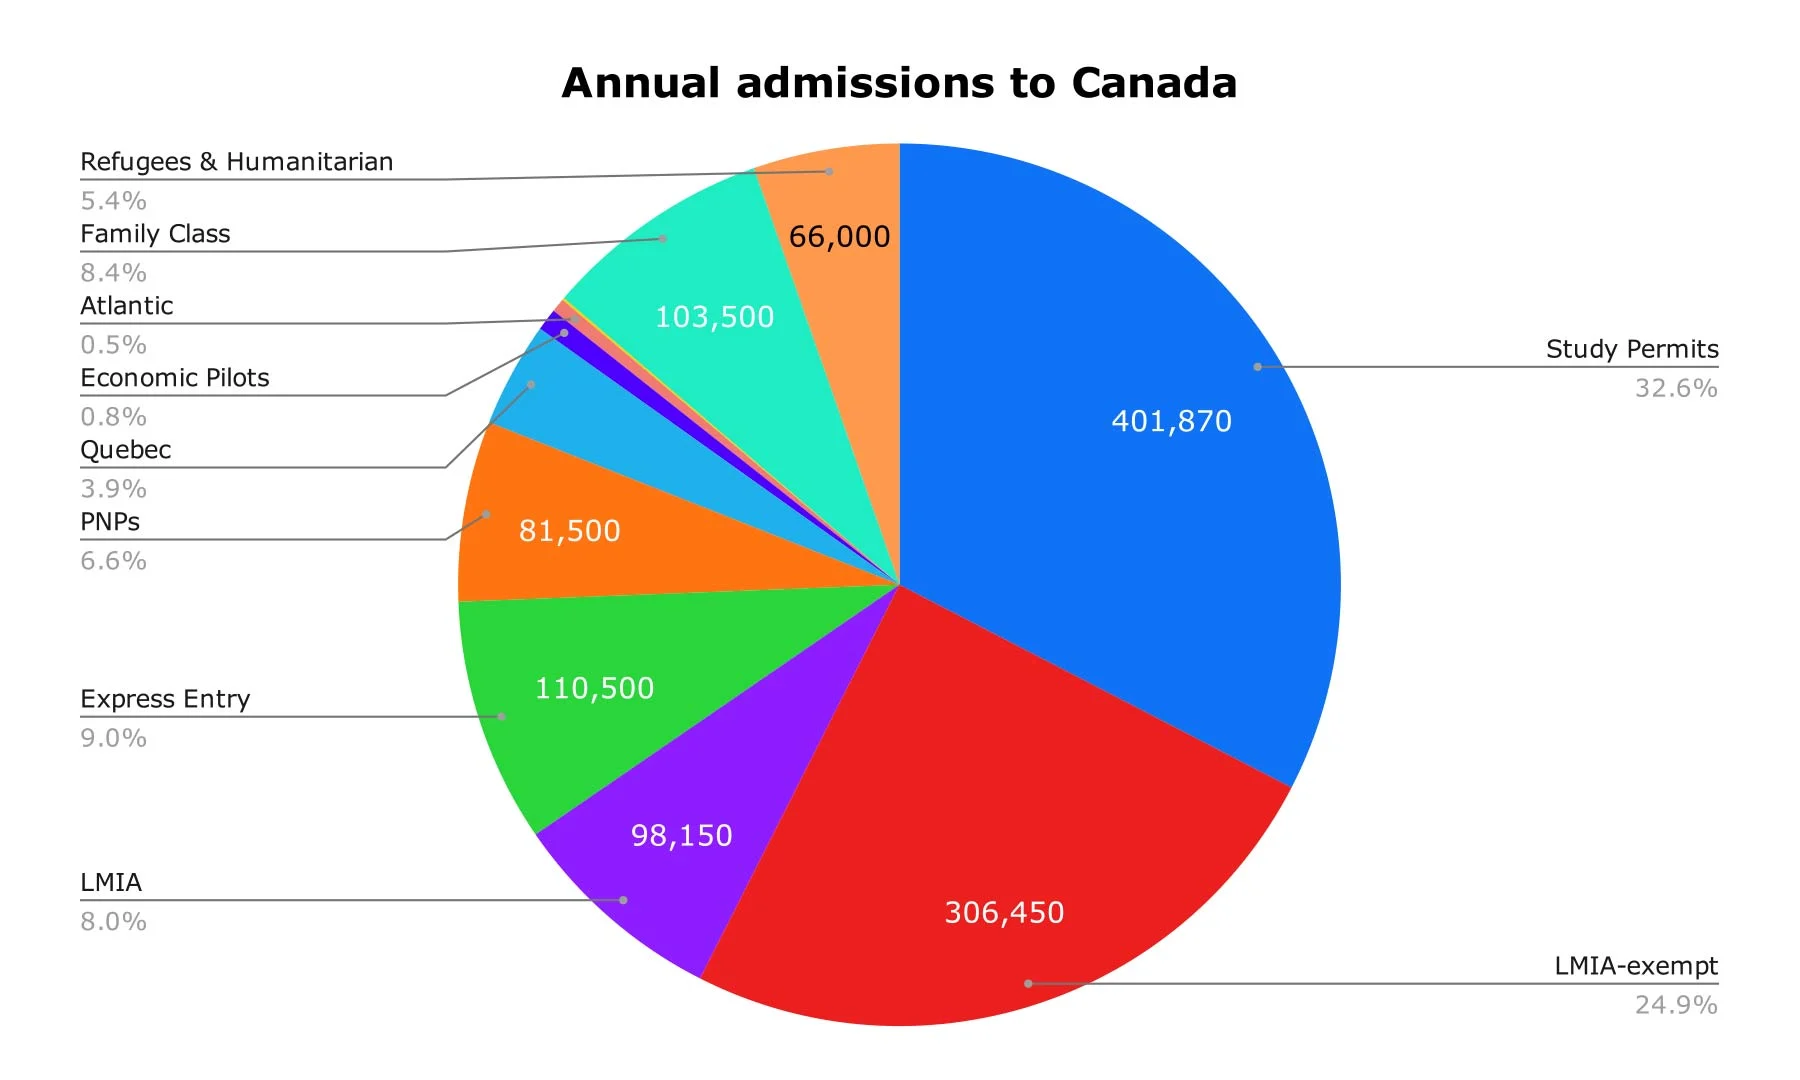 Pie chart describing Canada's annual immigration admissions